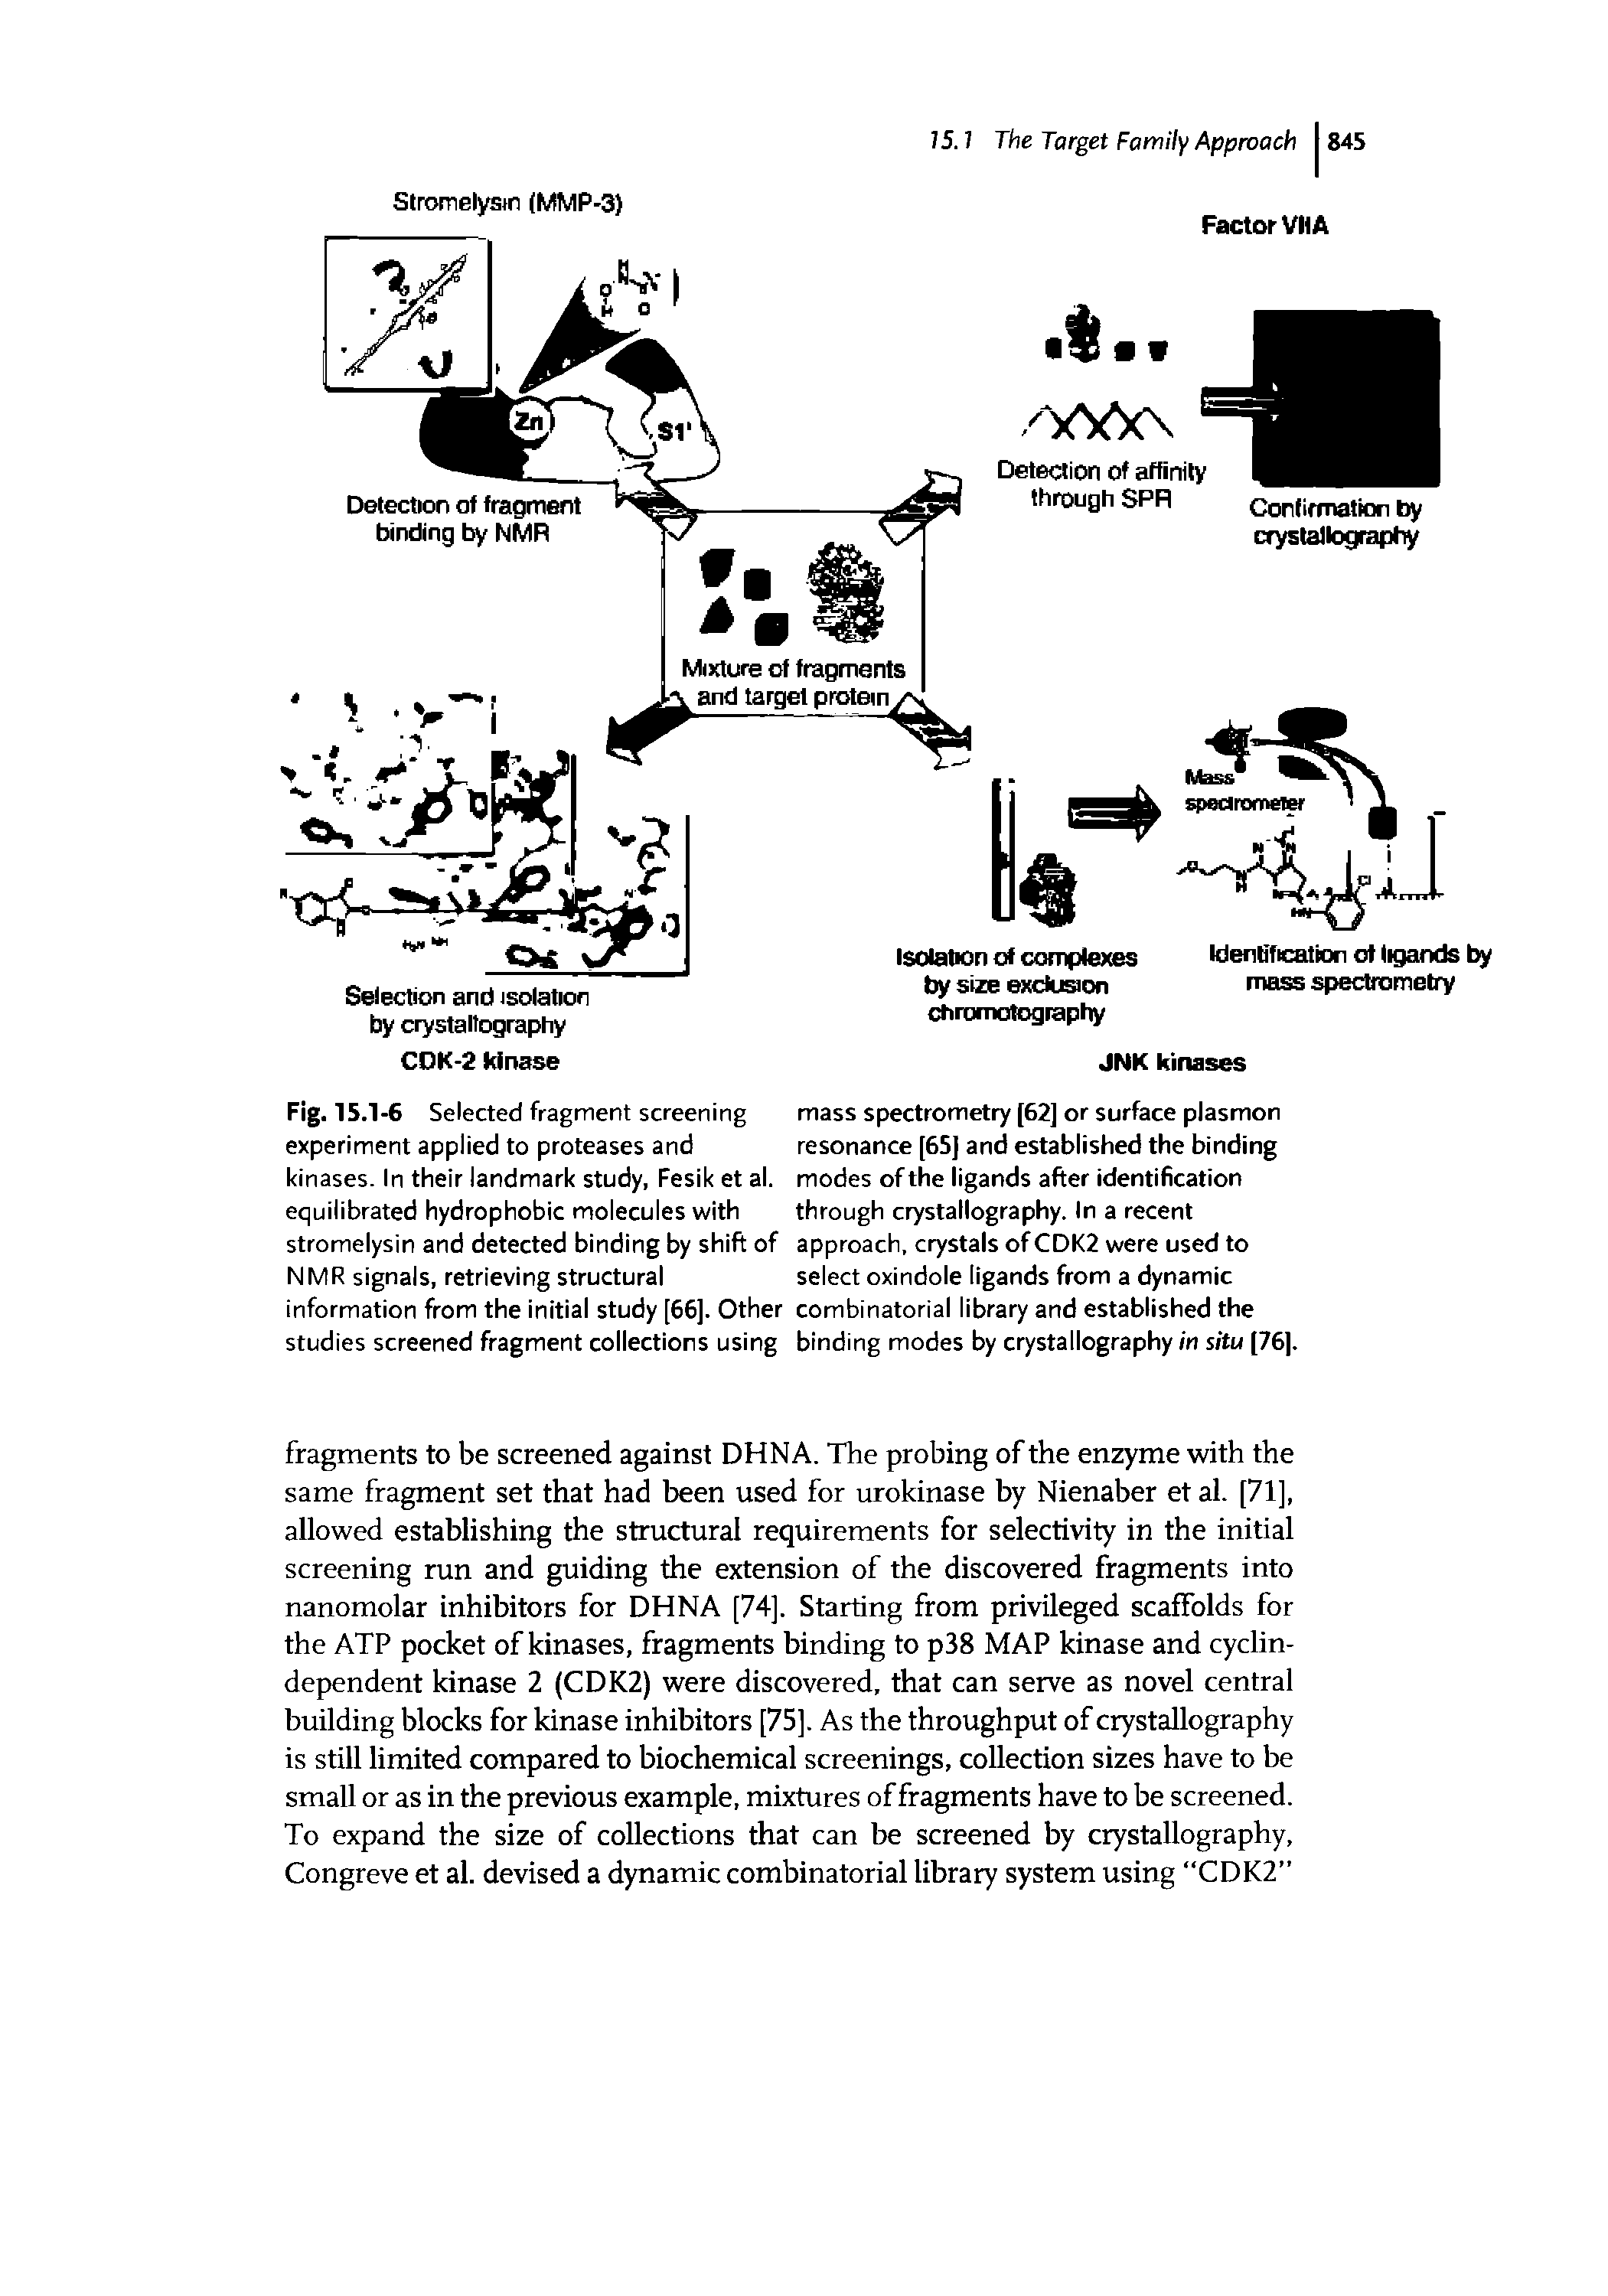 Fig. 15.1-6 Selected fragment screening experiment applied to proteases and kinases. In their landmark study, Fesik et al. equilibrated hydrophobic molecules with stromelysin and detected binding by shift of NMR signals, retrieving structural information from the initial study [66]. Other studies screened fragment collections using...